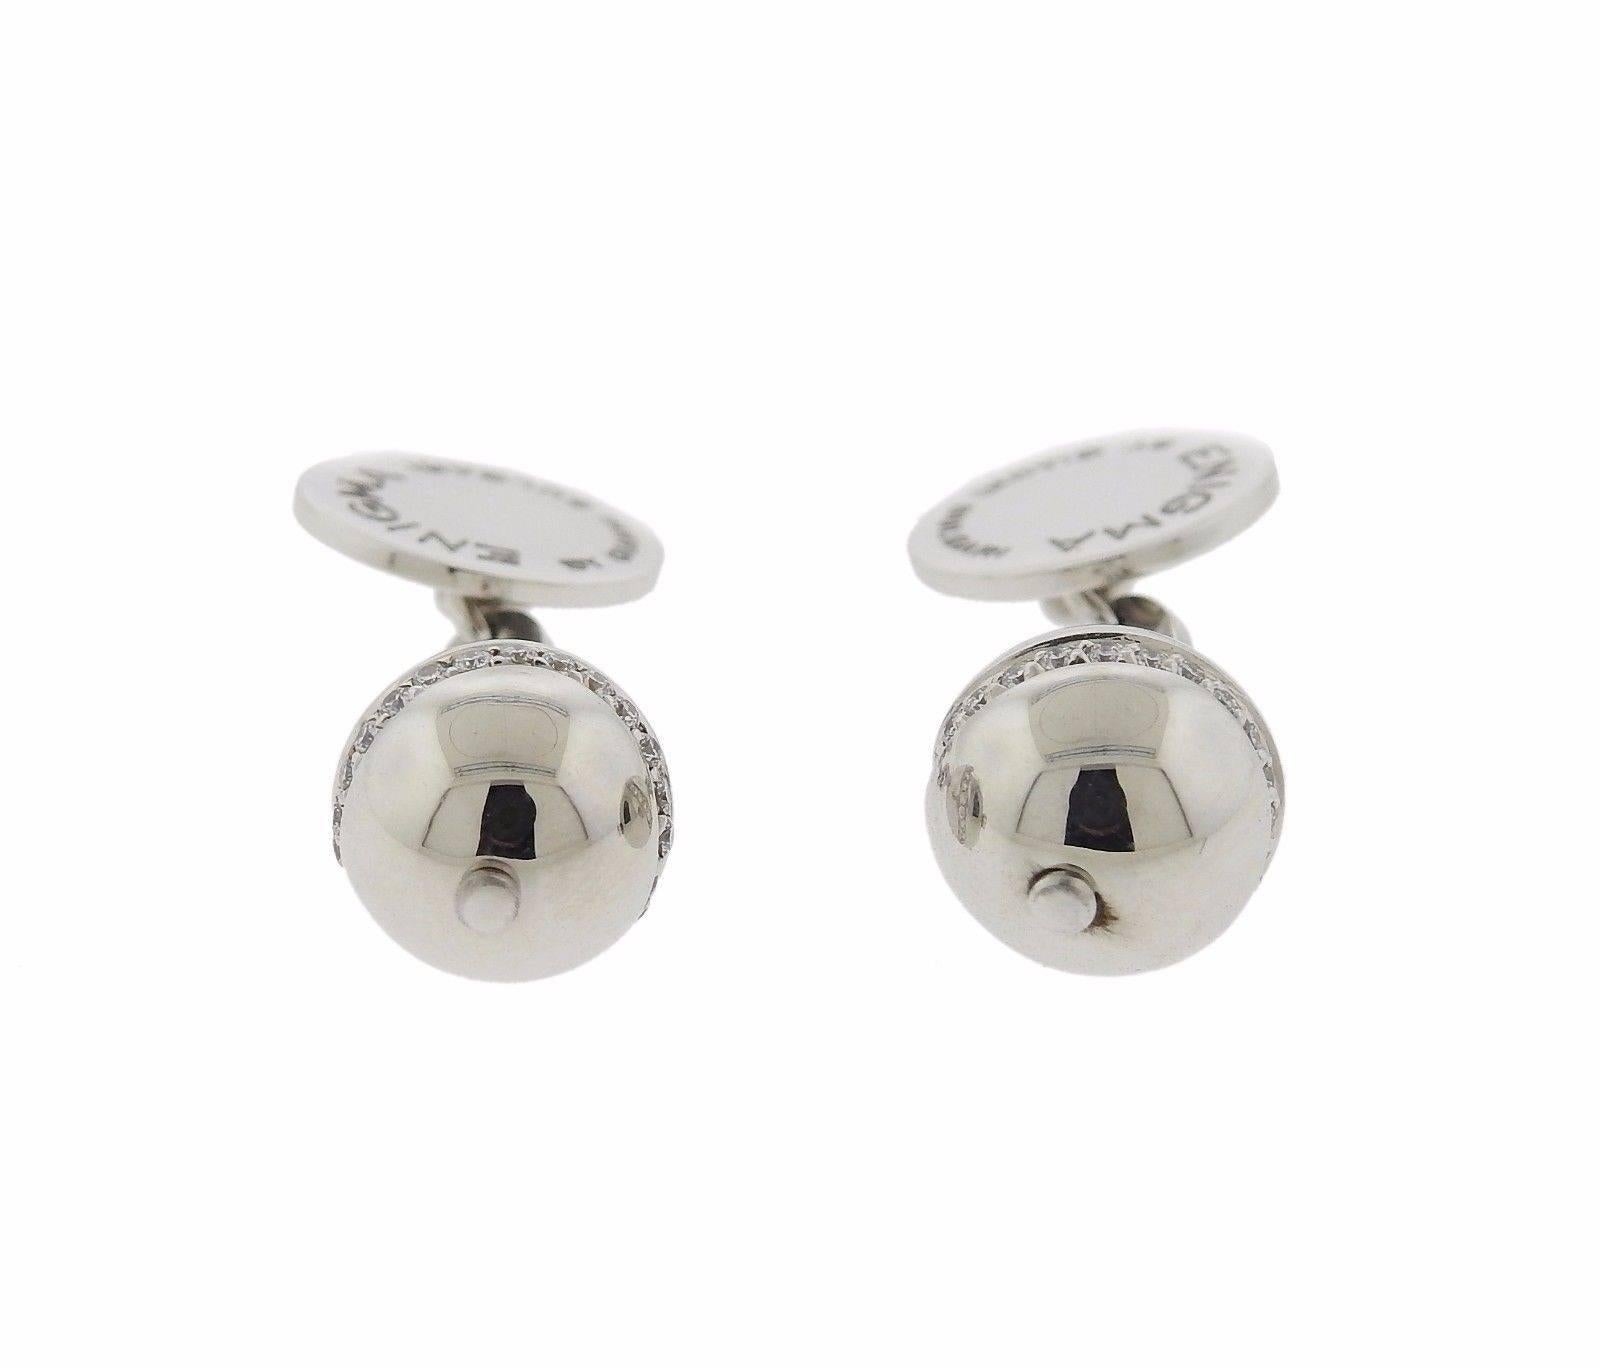 A pair of 18k white gold cufflinks set with approximately 0.36 ctw of G/VS diamonds.  The cufflinks balls measure 10.5mm in diameter and the backs are 12mm.  The weight of the pair is 12.4 grams.  Marked:	Enigma by Gianni Bulgari, 750, 1498AR.